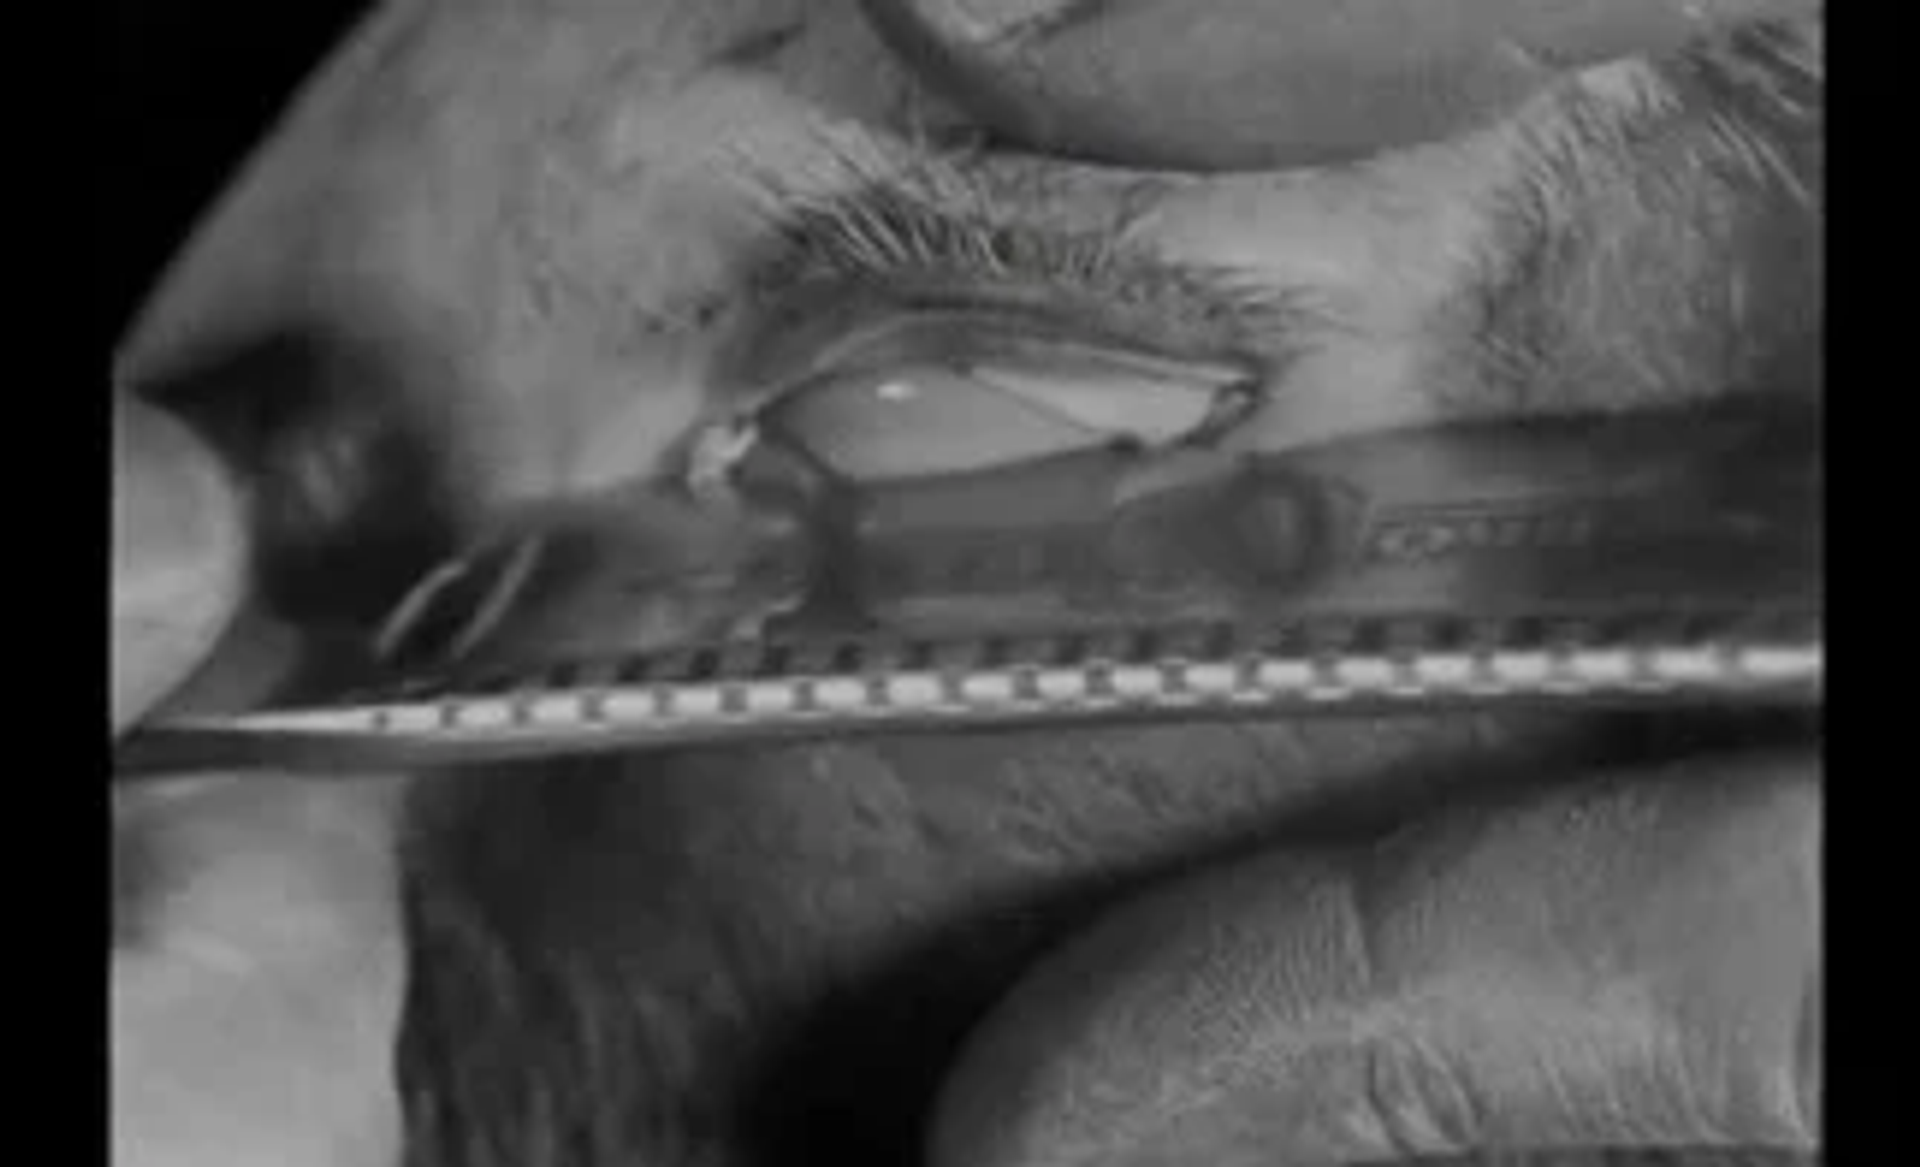 A still shot of the movie Un Chien Andalou where an eyeball is being sliced